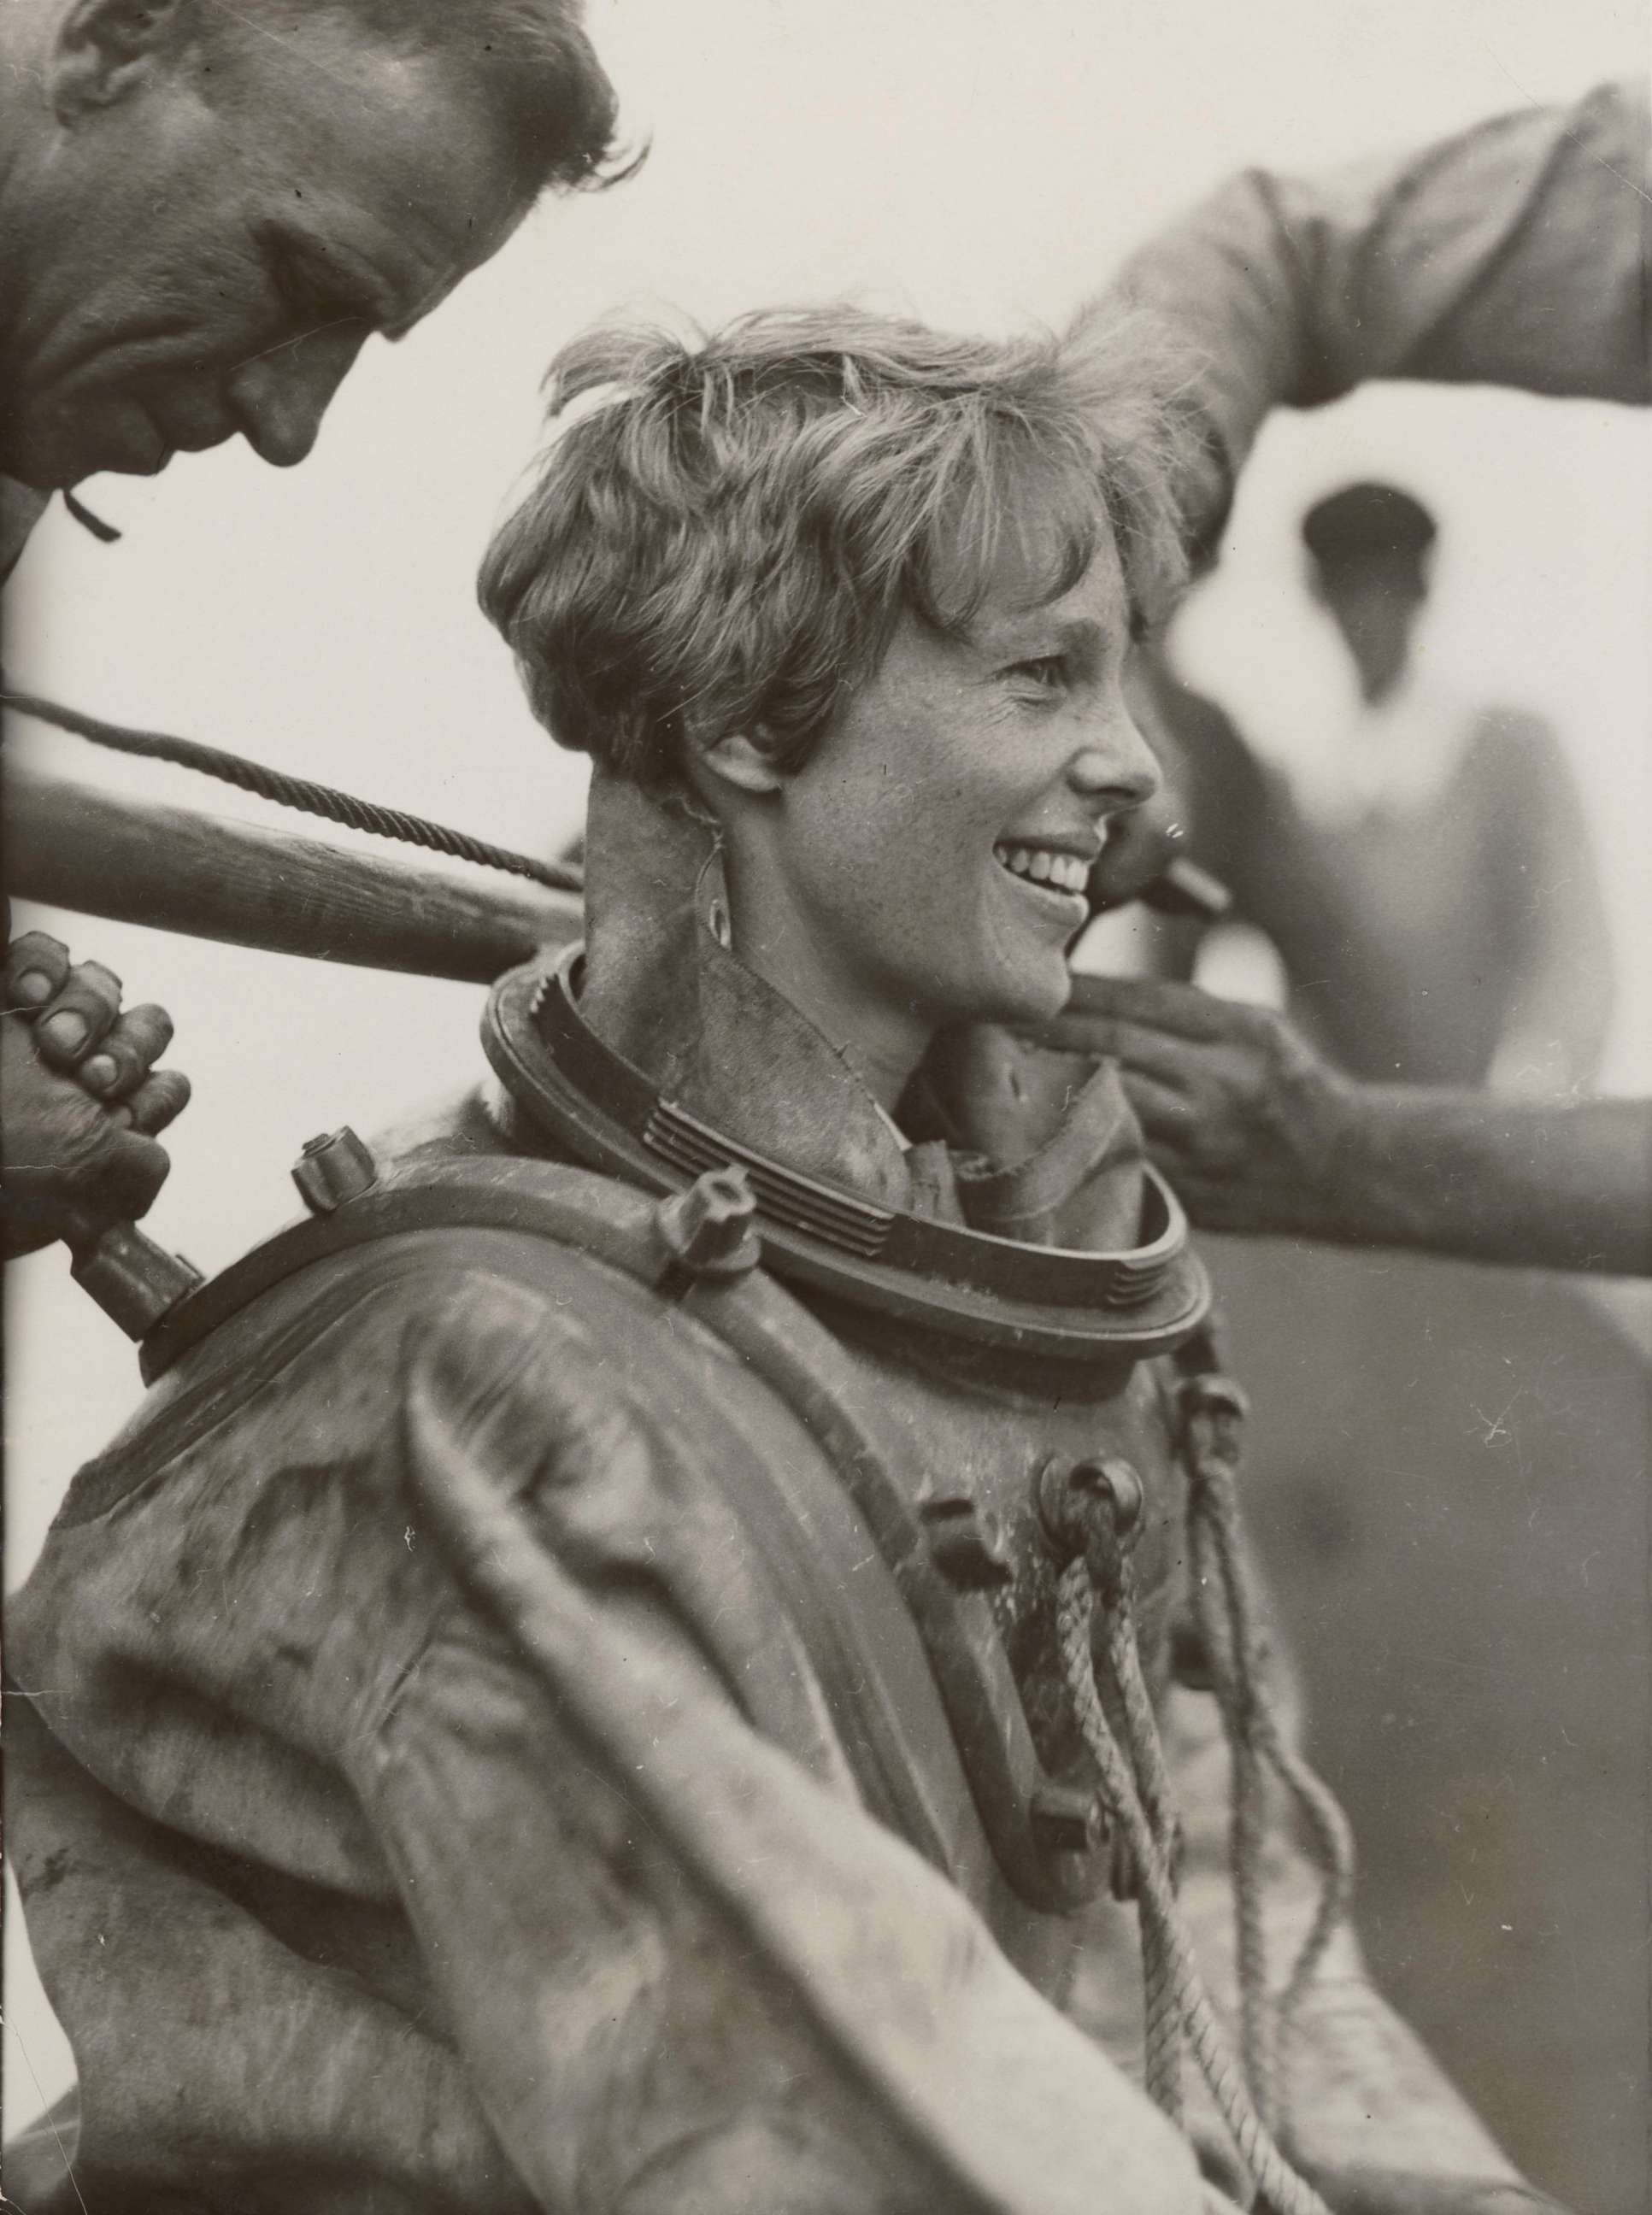 PHOTO: This photo, dated July 25, 1929, on the back shows Amelia Earhart preparing to go diving off Block Island. HISTORY is airing the two-hour special "Amelia Earhart: The Lost Evidence" on July 9, 2017.